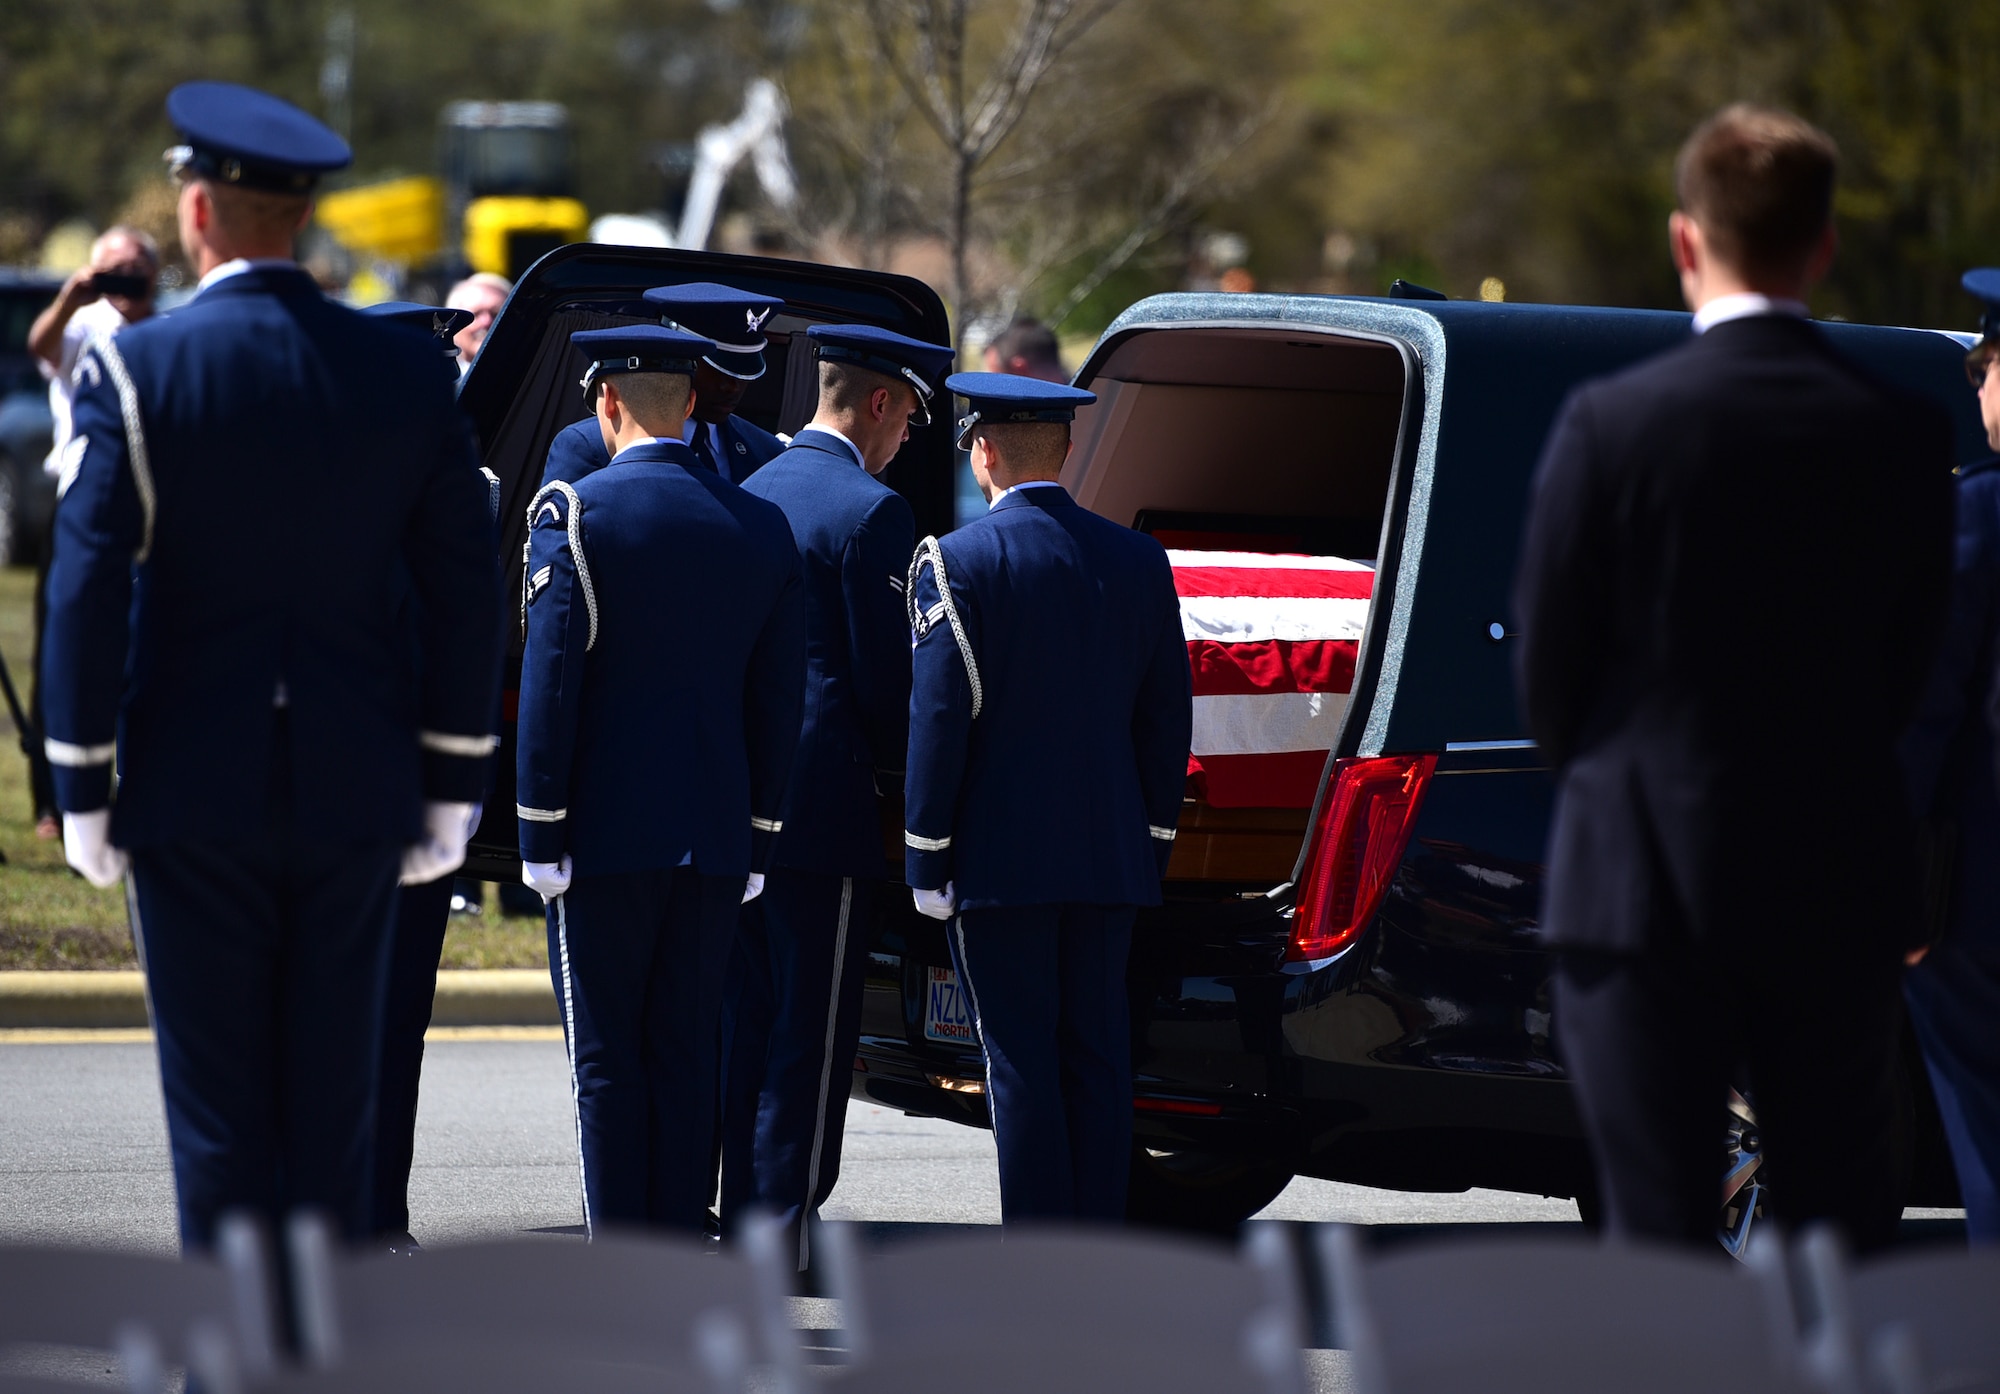 Members of the Seymour Johnson Honor Guard transfer the remains of Col. Edgar Davis April 6, 2018, in Goldsboro, North Carolina. Davis was shot down during a night photo-reconnaissance mission over Laos during the Vietnam War. After initial rescue efforts were unsuccessful, he was assumed dead and his remains stayed missing for 50 years. (U.S. Air Force photo by Senior Airman Christian Clausen)